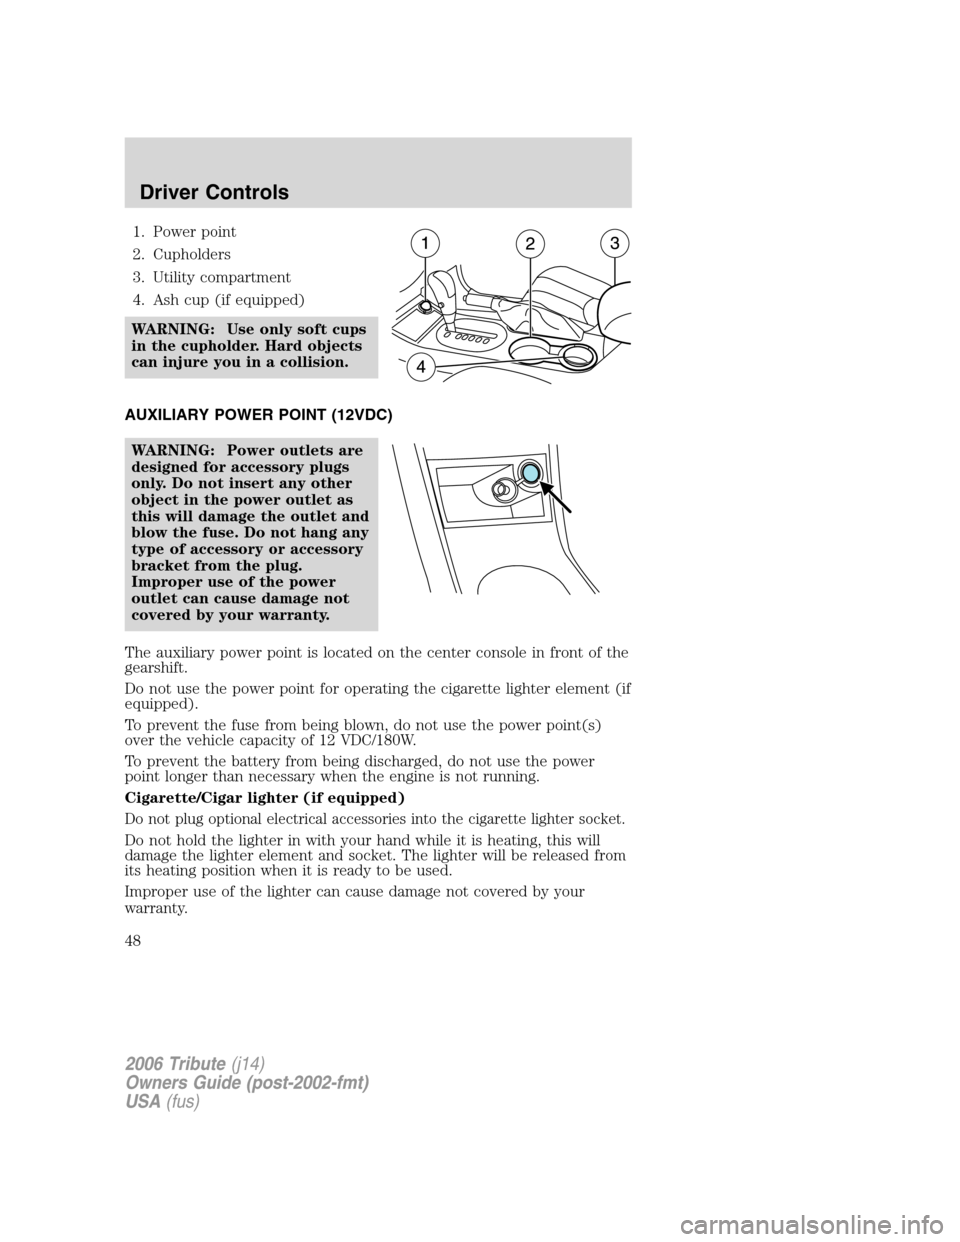 MAZDA MODEL TRIBUTE 2006   (in English) Service Manual 1. Power point
2. Cupholders
3. Utility compartment
4. Ash cup (if equipped)
WARNING: Use only soft cups
in the cupholder. Hard objects
can injure you in a collision.
AUXILIARY POWER POINT (12VDC)
WAR